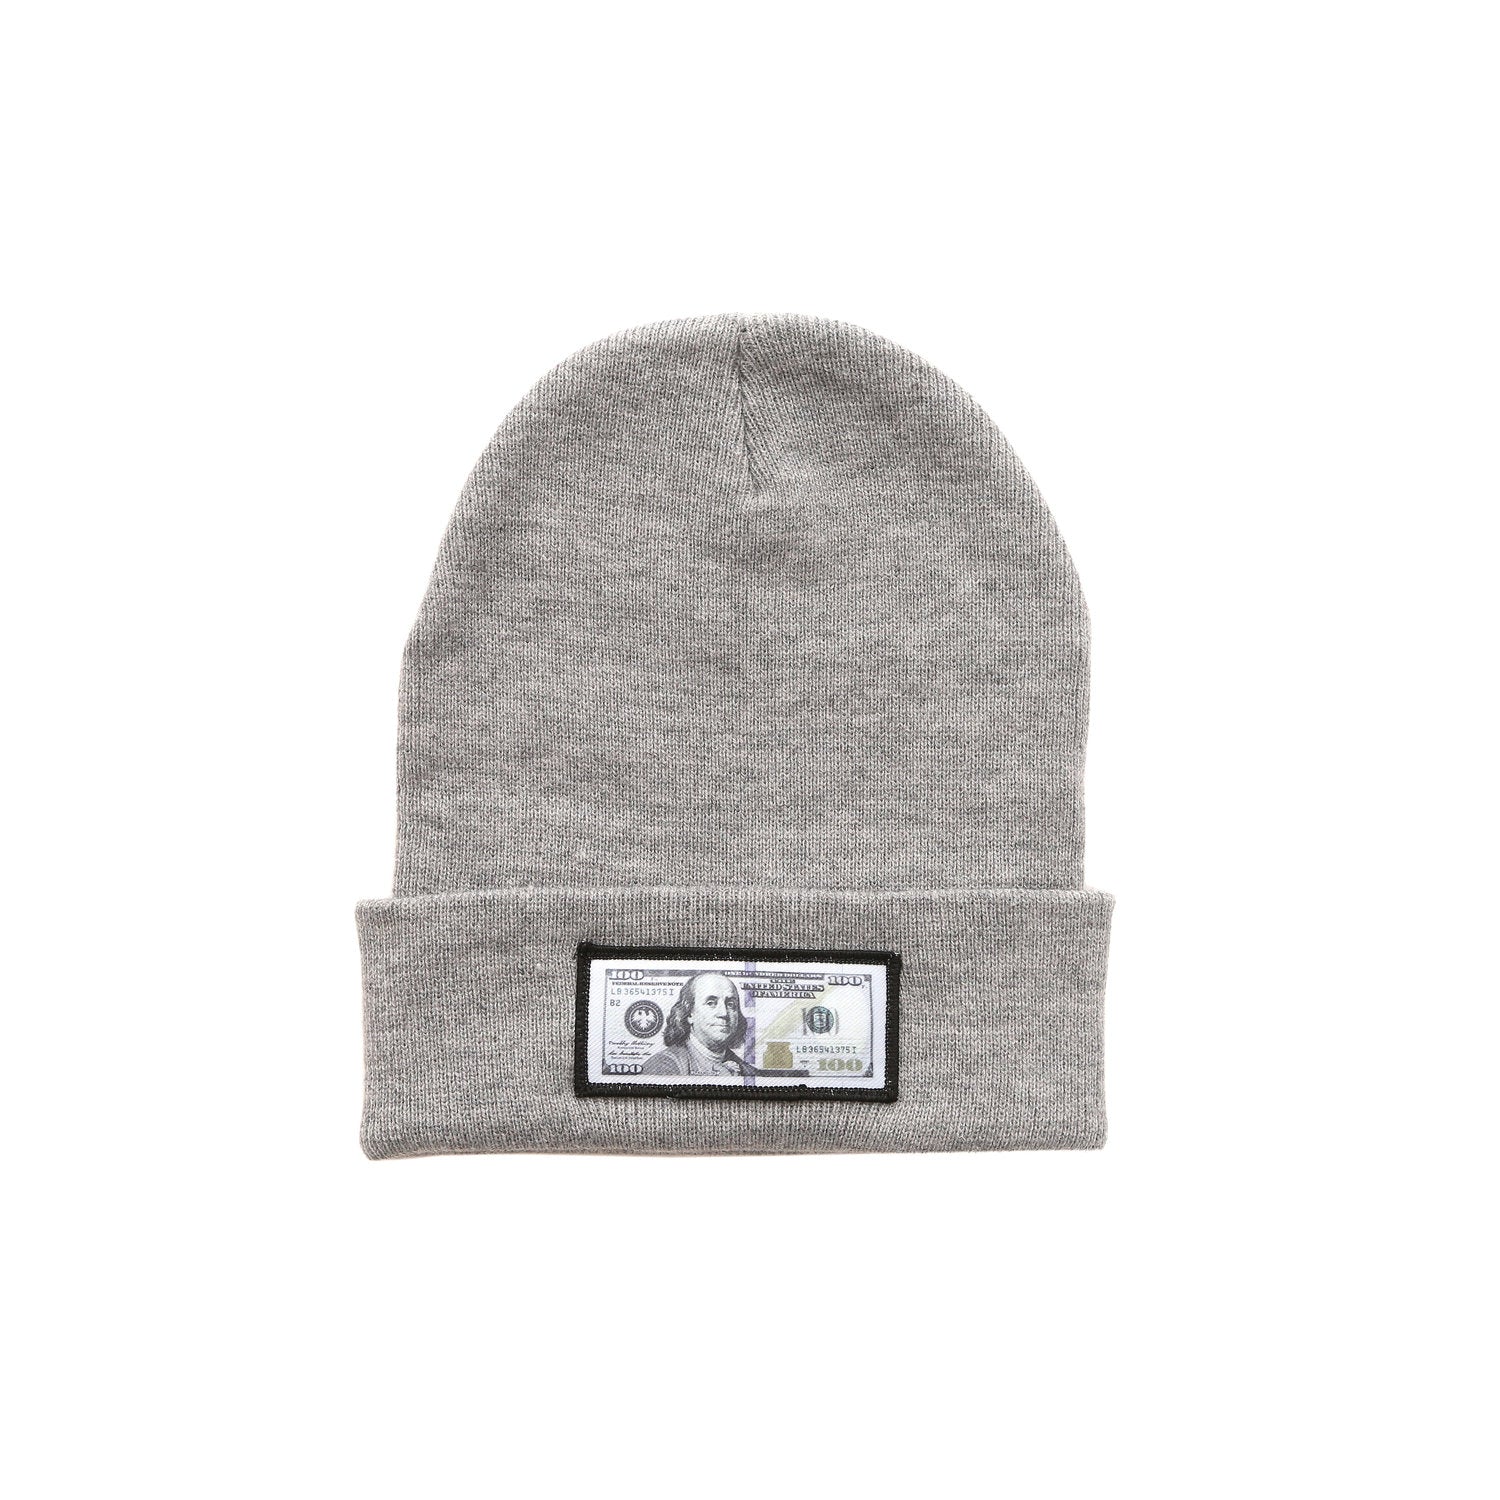 Grey comfy beanie with $100 logo on front